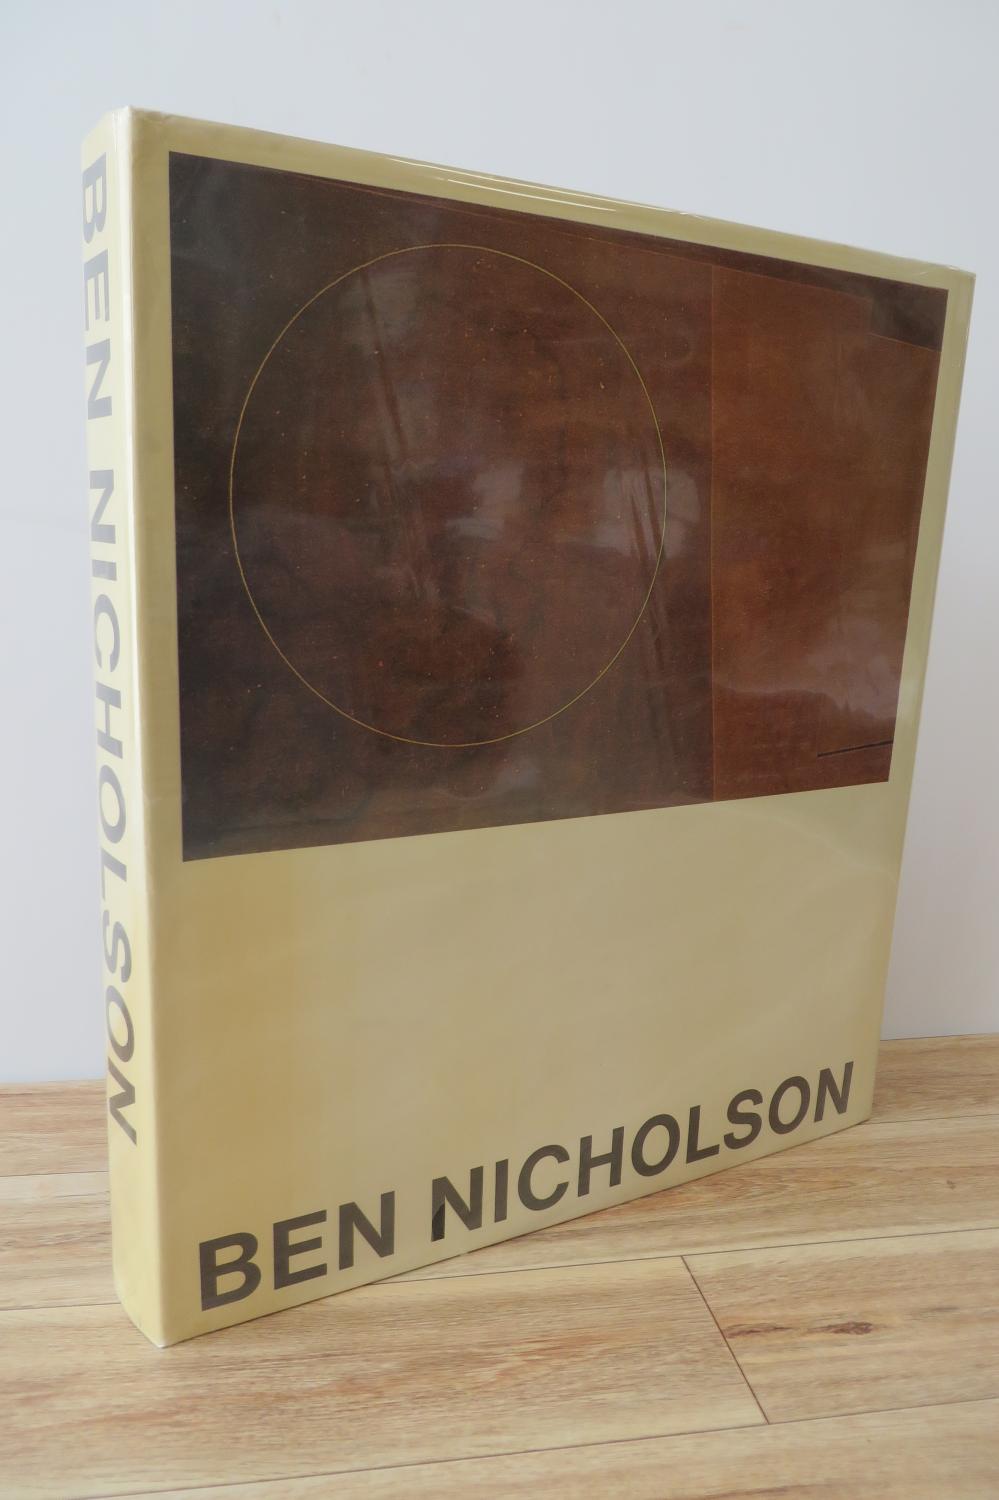 Ben Nicholson: drawings paintings and reliefs 1911-1968